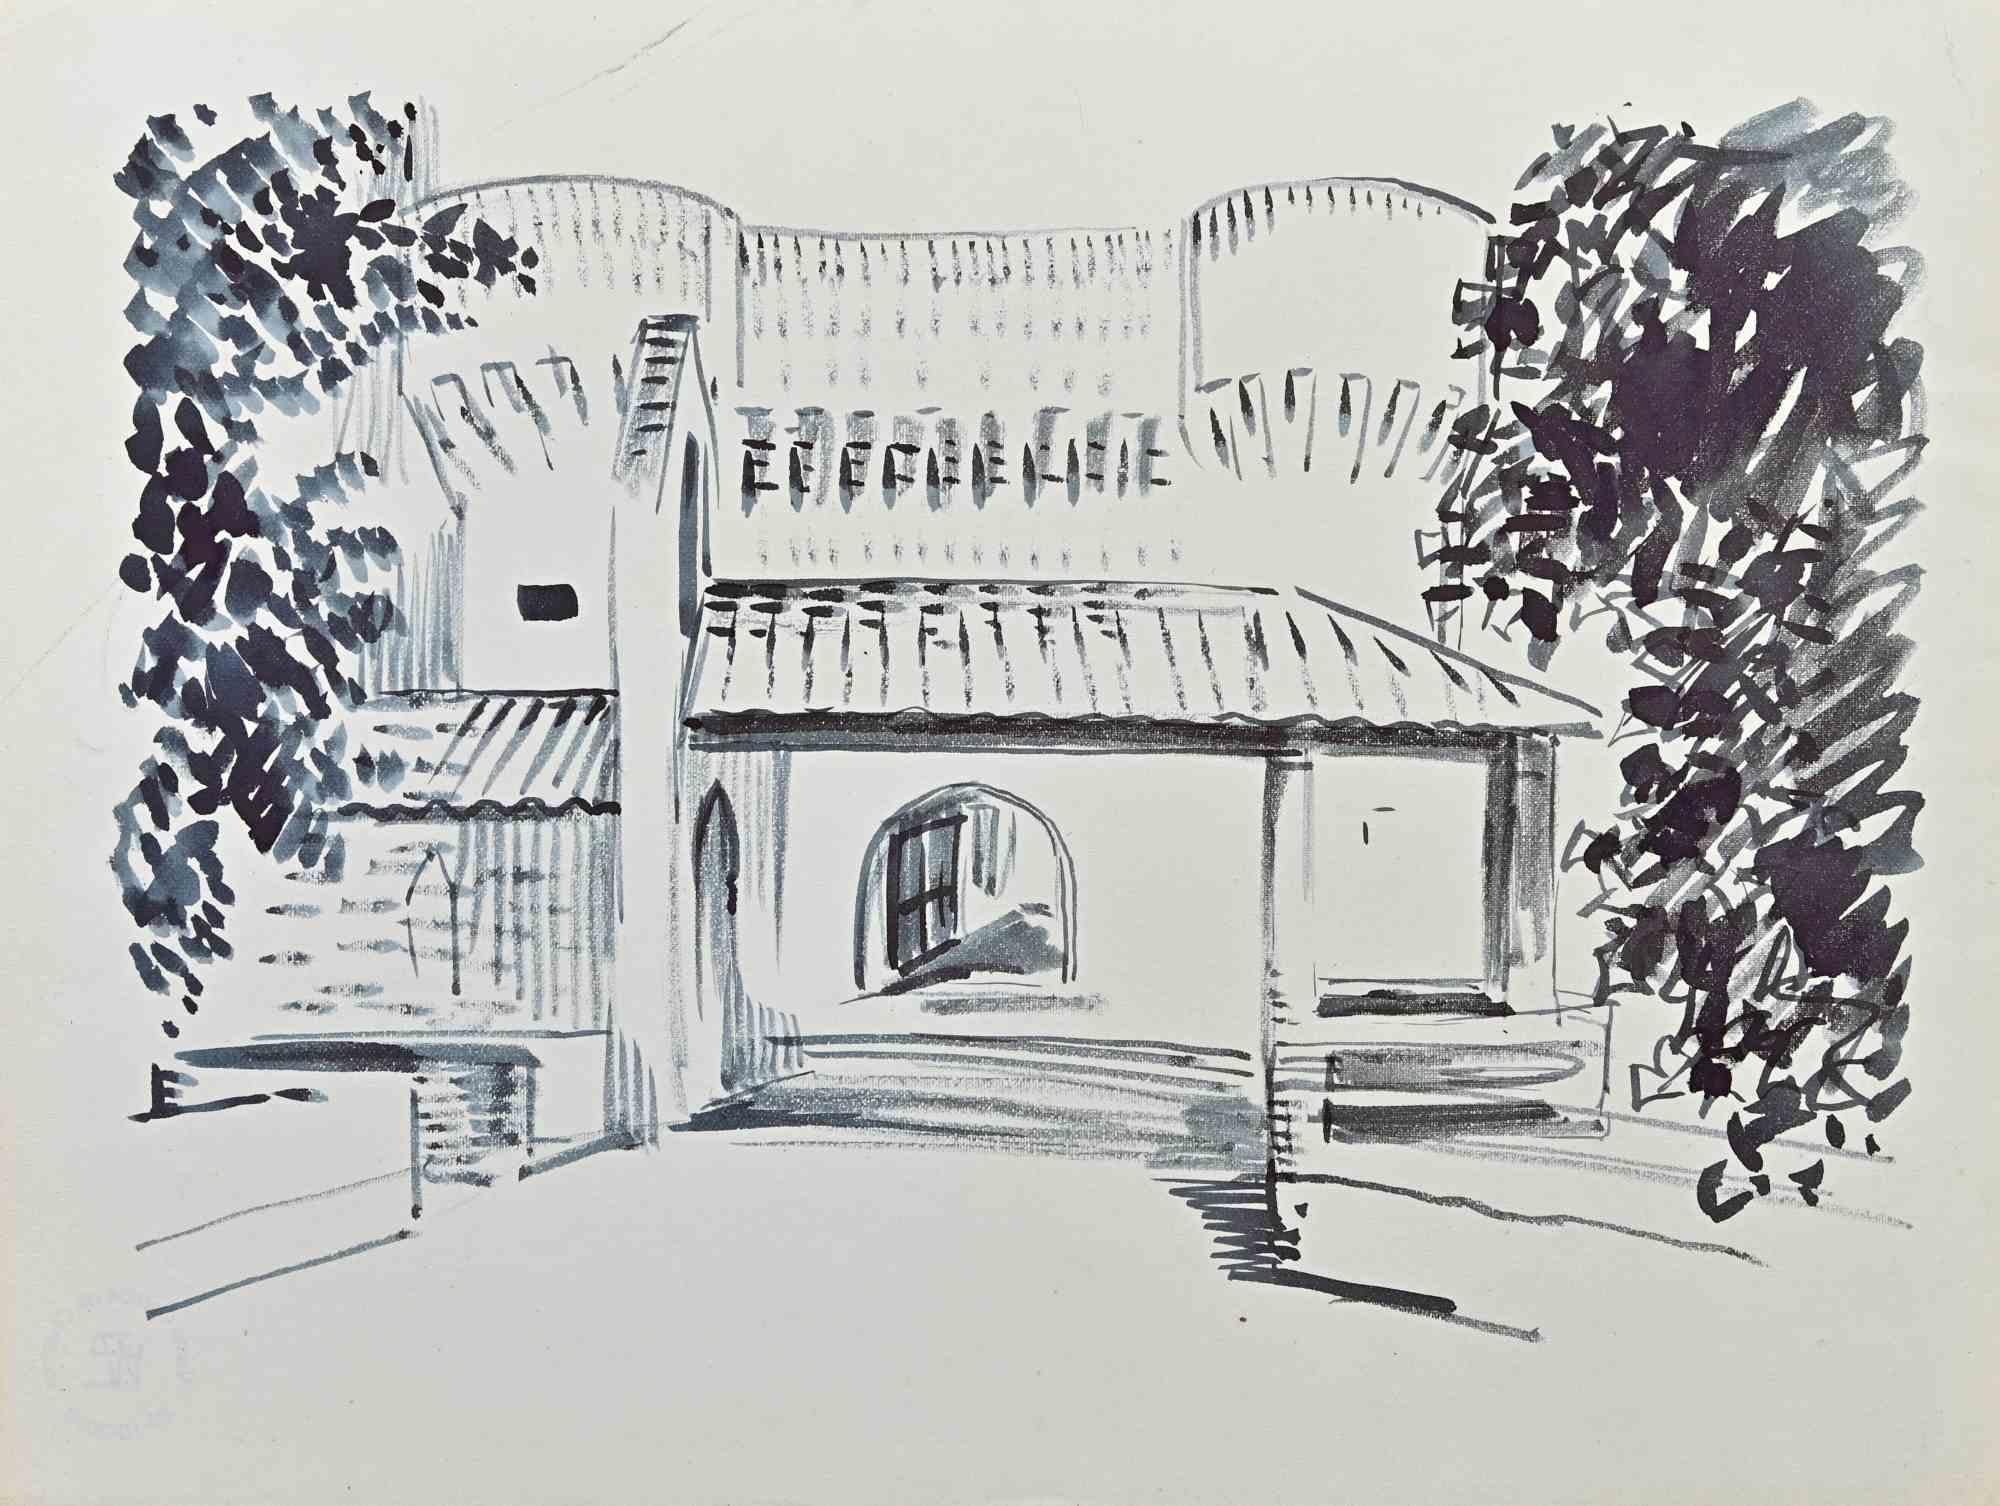 Old Building - Drawing by Hermann Paul - Early 20th Century